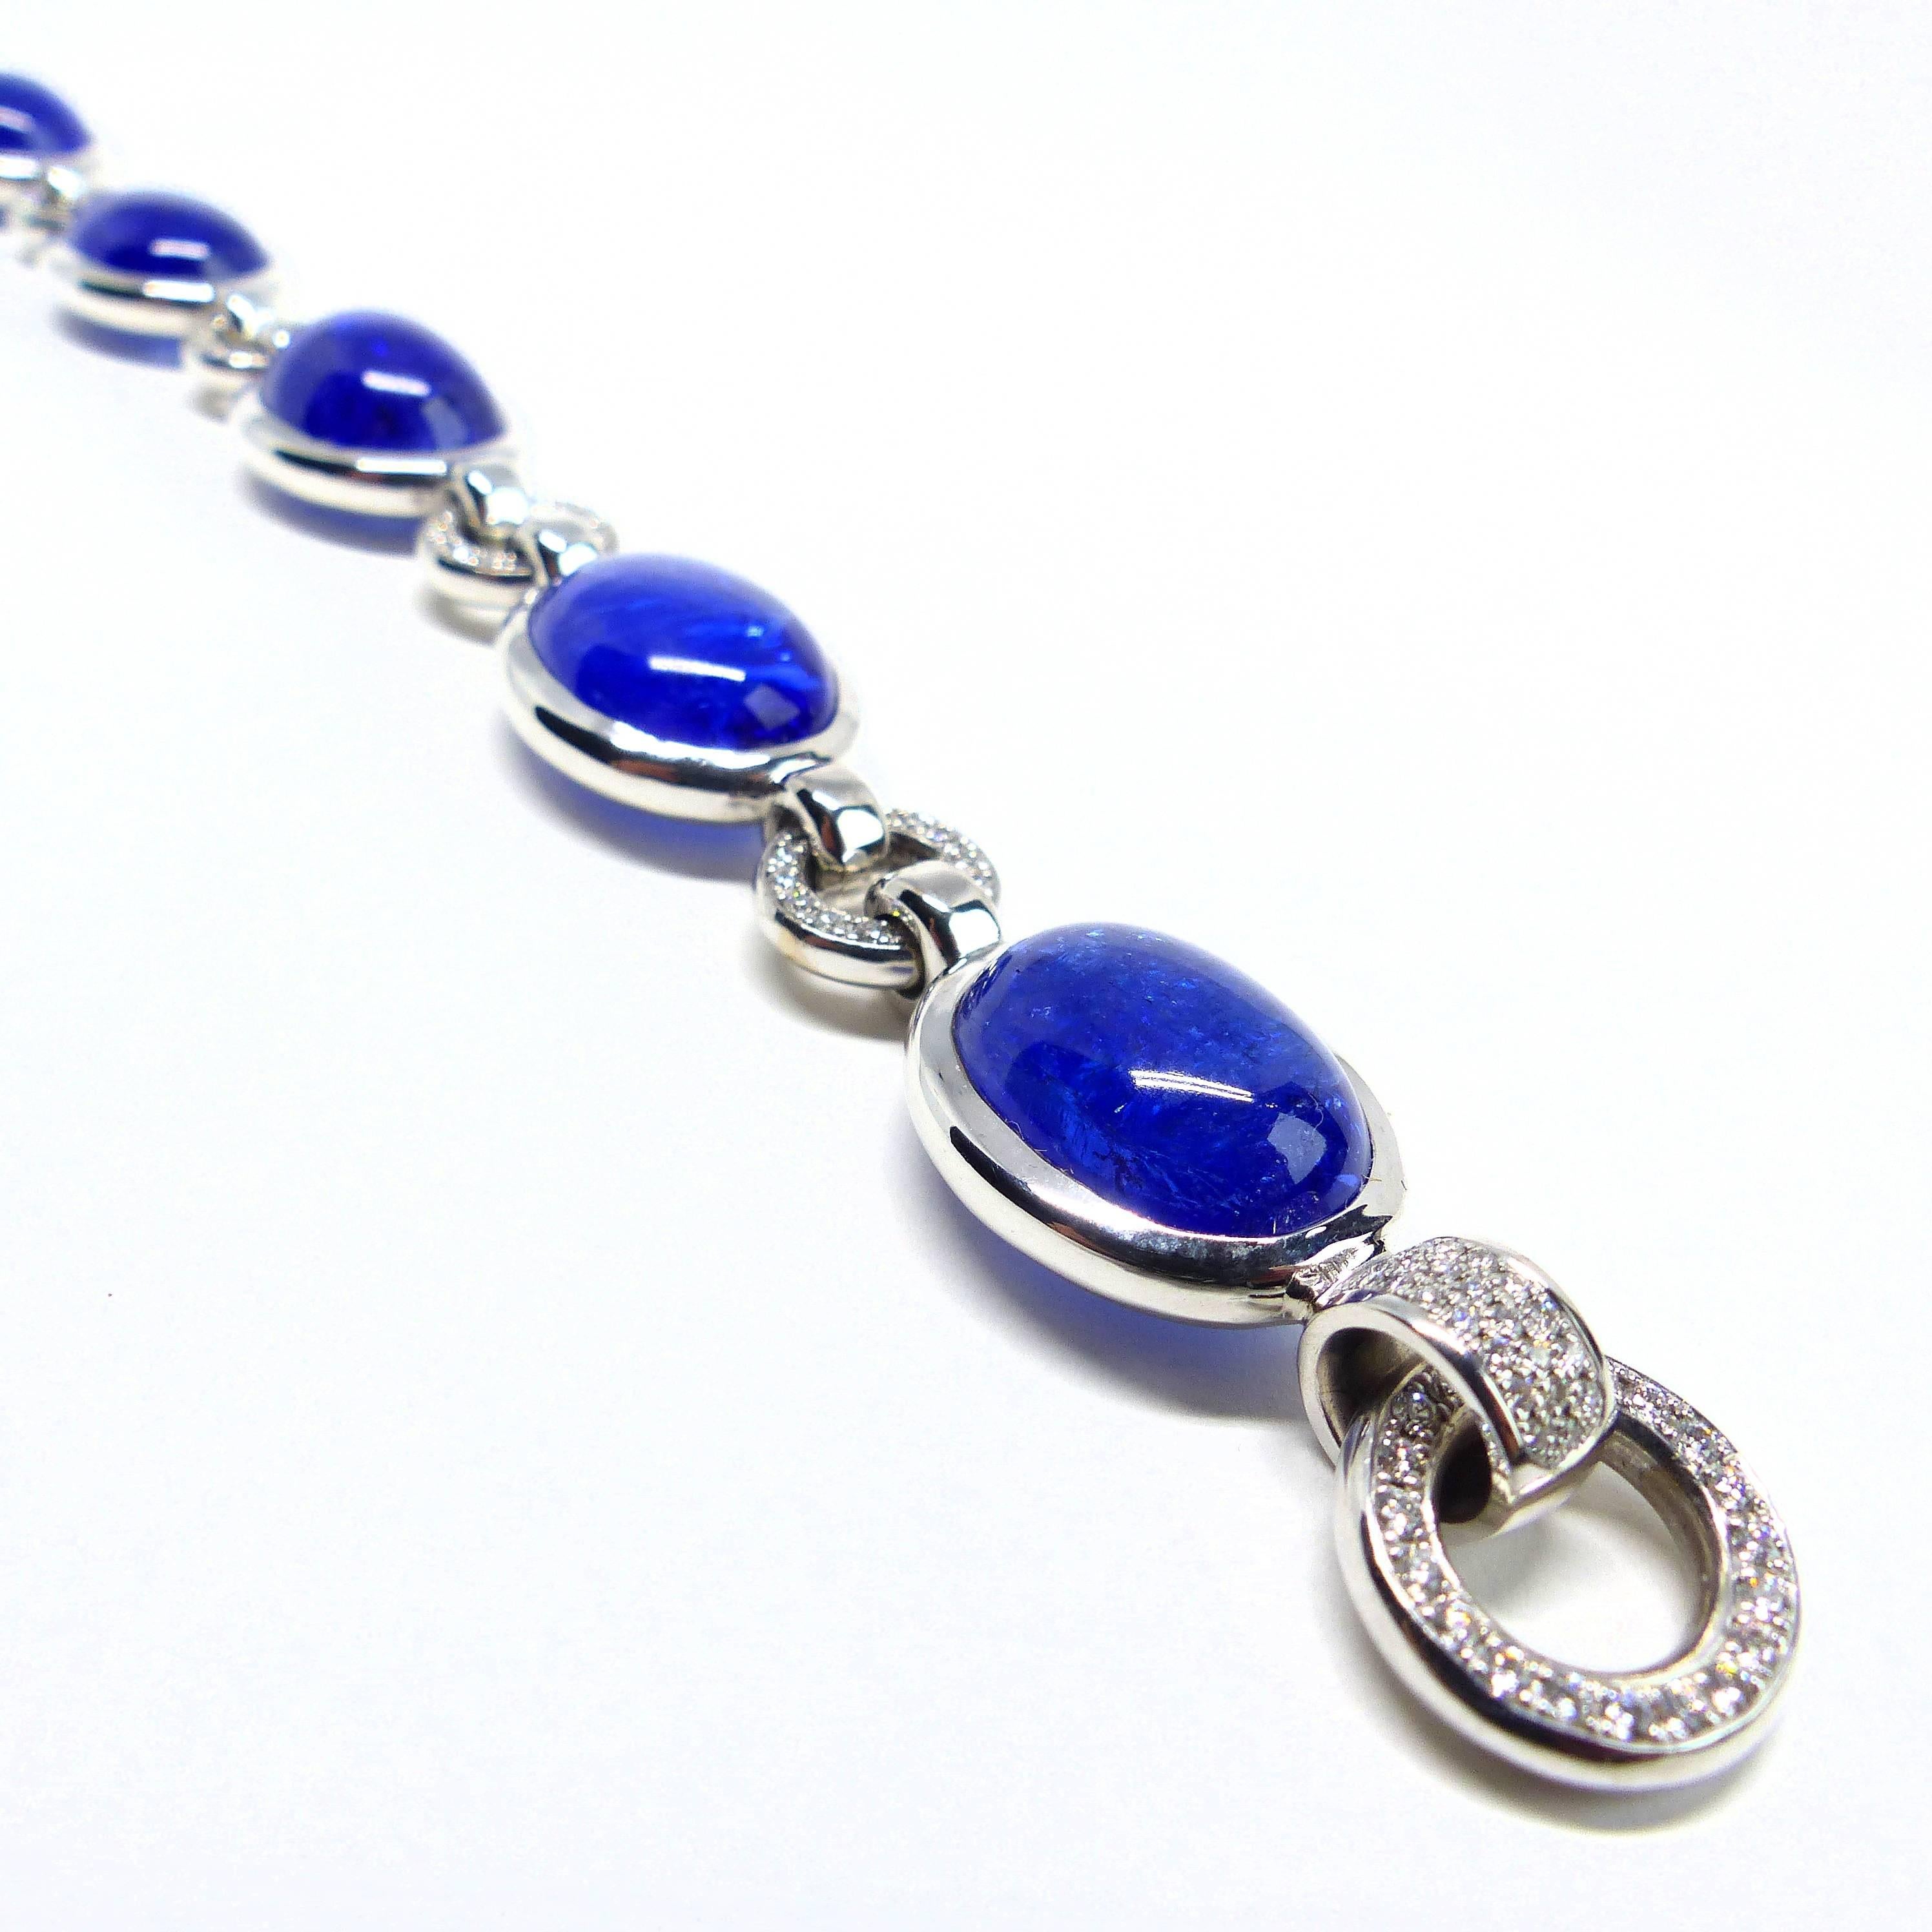 Thomas Leyser is renowned for his contemporary jewellery designs utilizing fine gemstones. 

This 18k white gold (46.11g) bracelet is set with six top quality Tanzanite Cabouchons (60.72cts. in total). It is accentuated by 61 diamonds pavé brillant